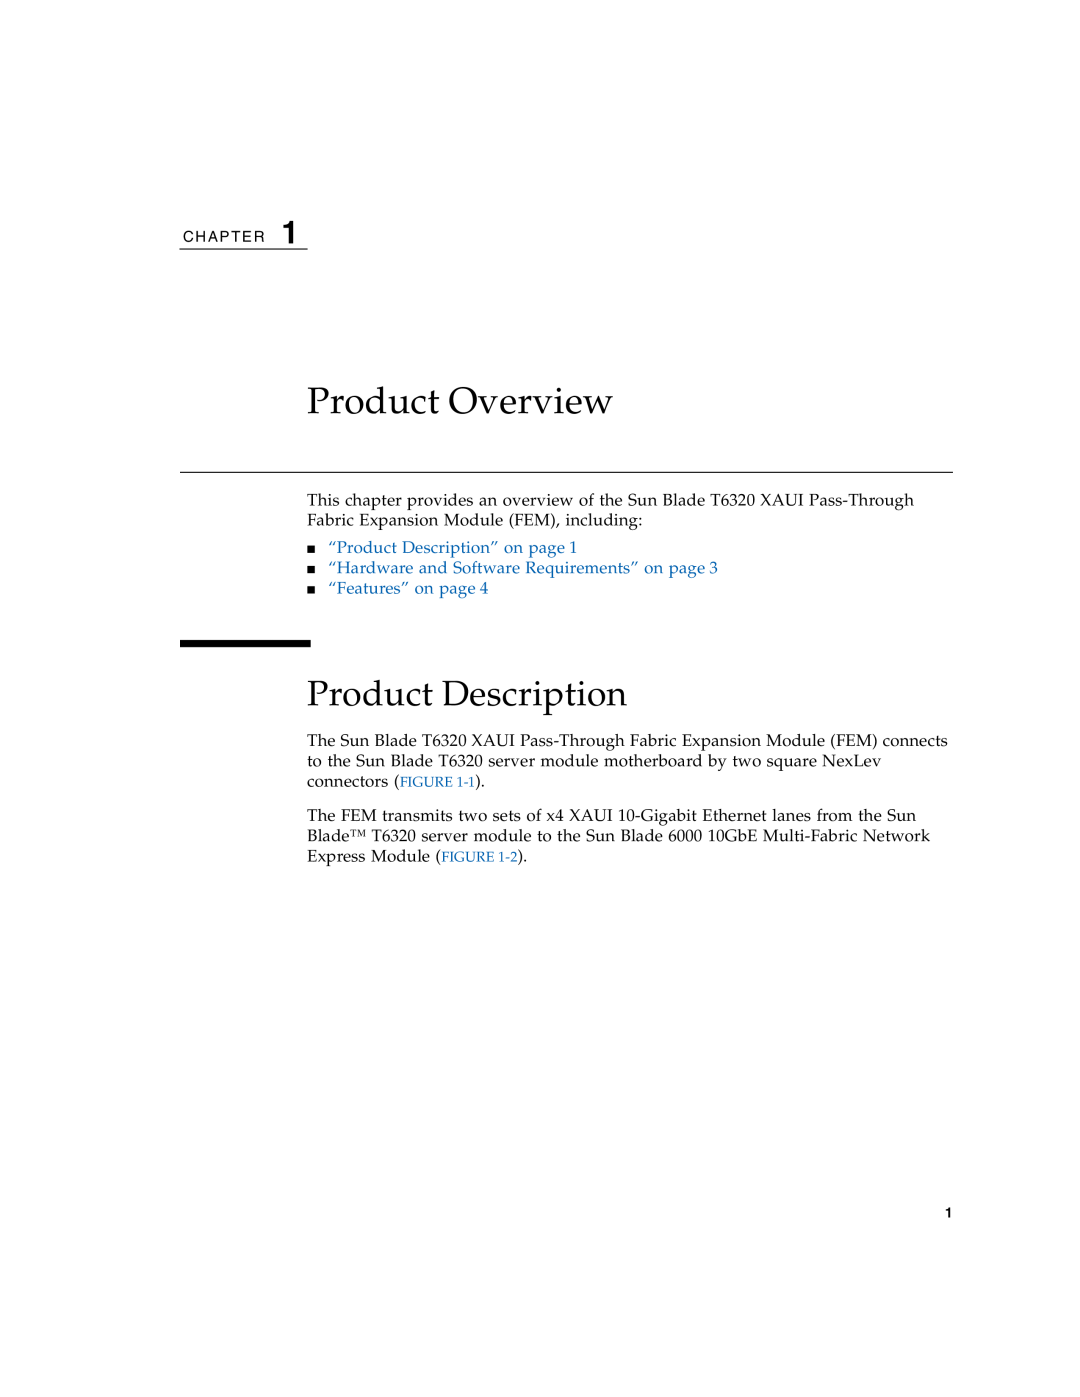 Sun Microsystems T6320 manual Product Overview, “Product Description” on page 